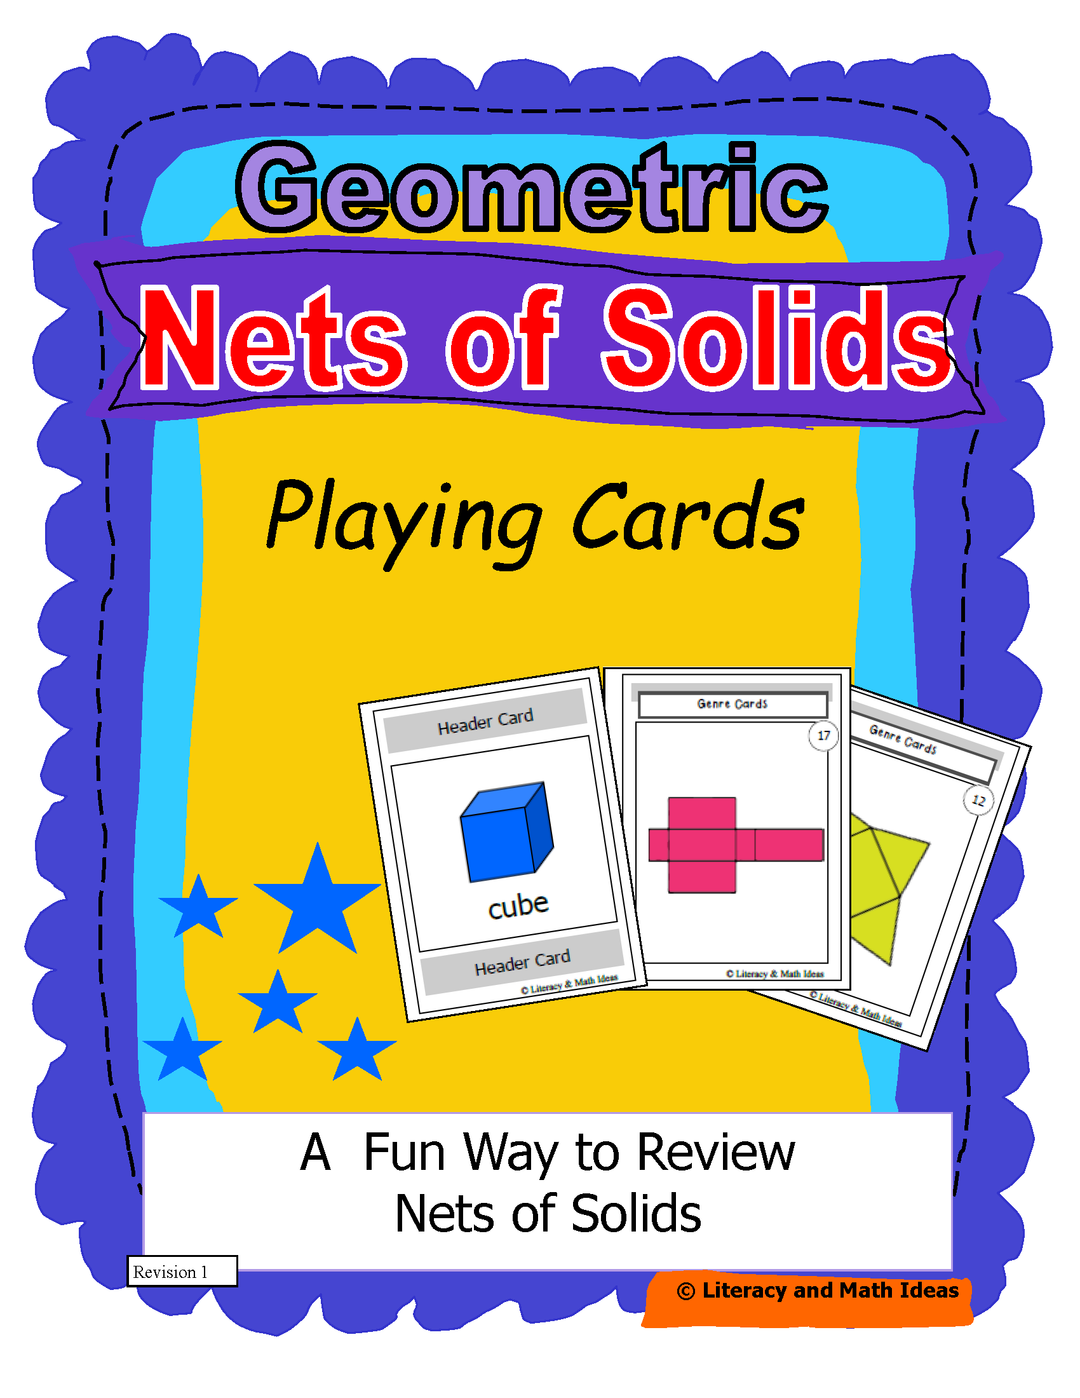 Geometric Nets of Solids Playing Cards